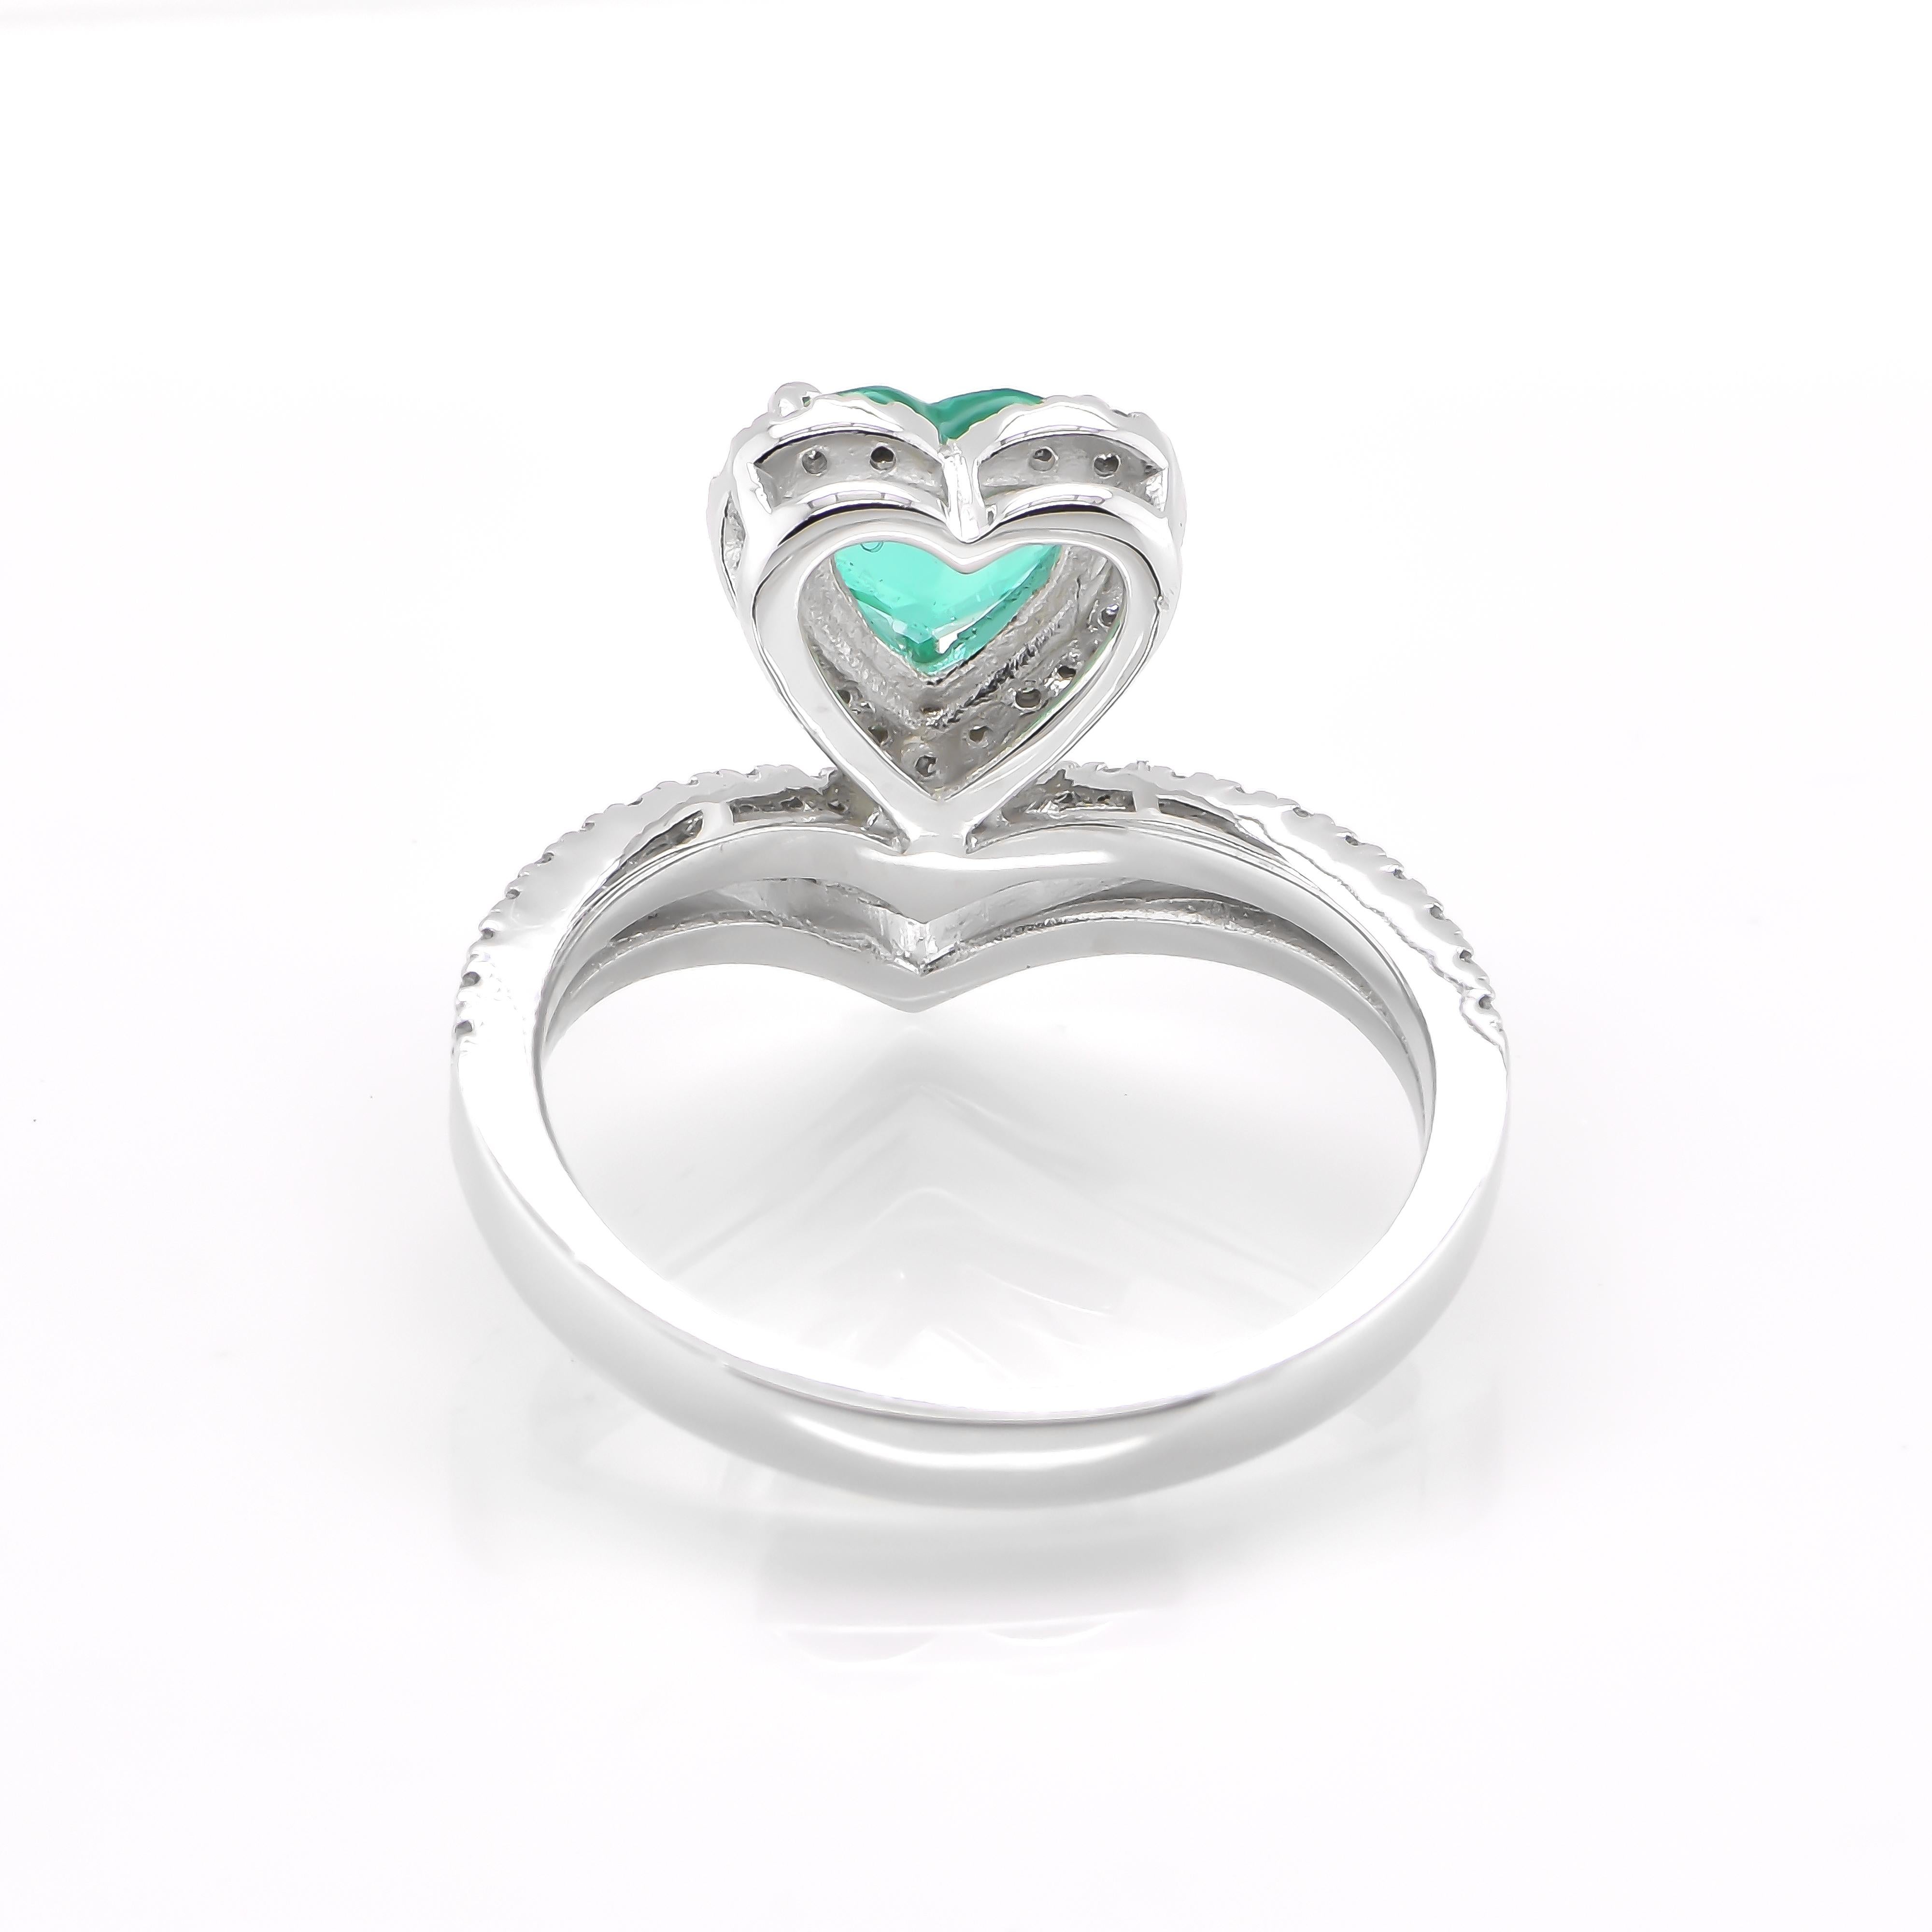 Women's 0.65 Carat Emerald and Diamond Tiara Cocktail Ring Made in Platinum For Sale